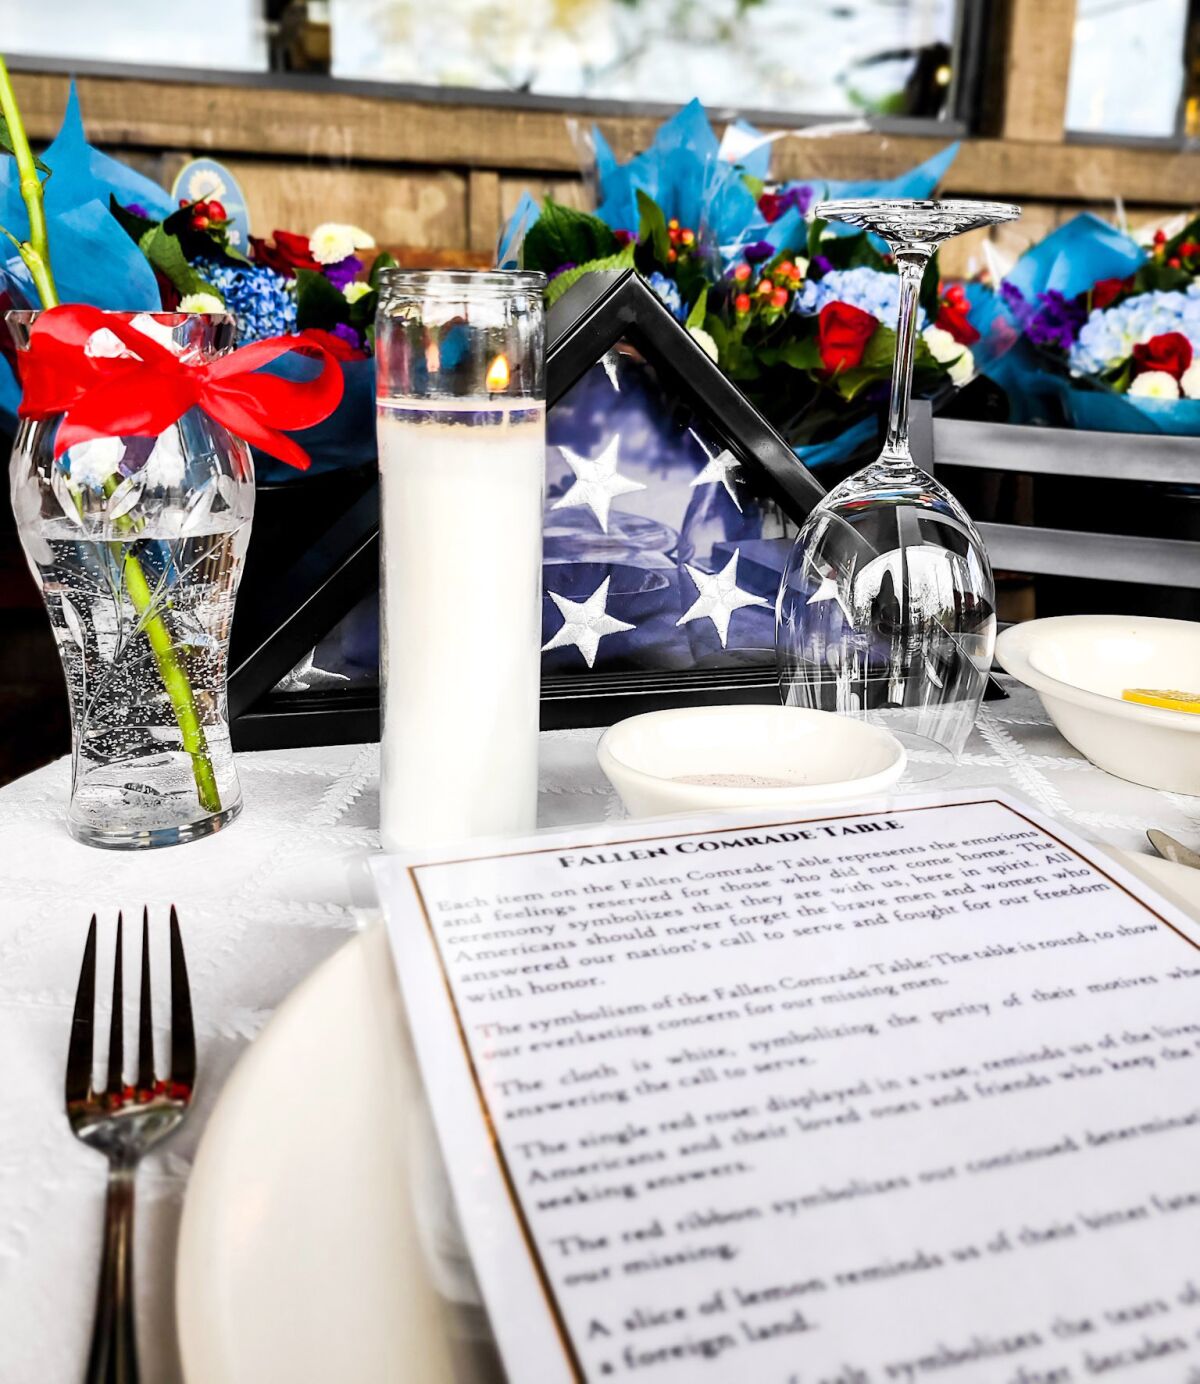 A Missing Man Table set up at Ramona Family Naturals Market is filled with symbols in honor of military members.